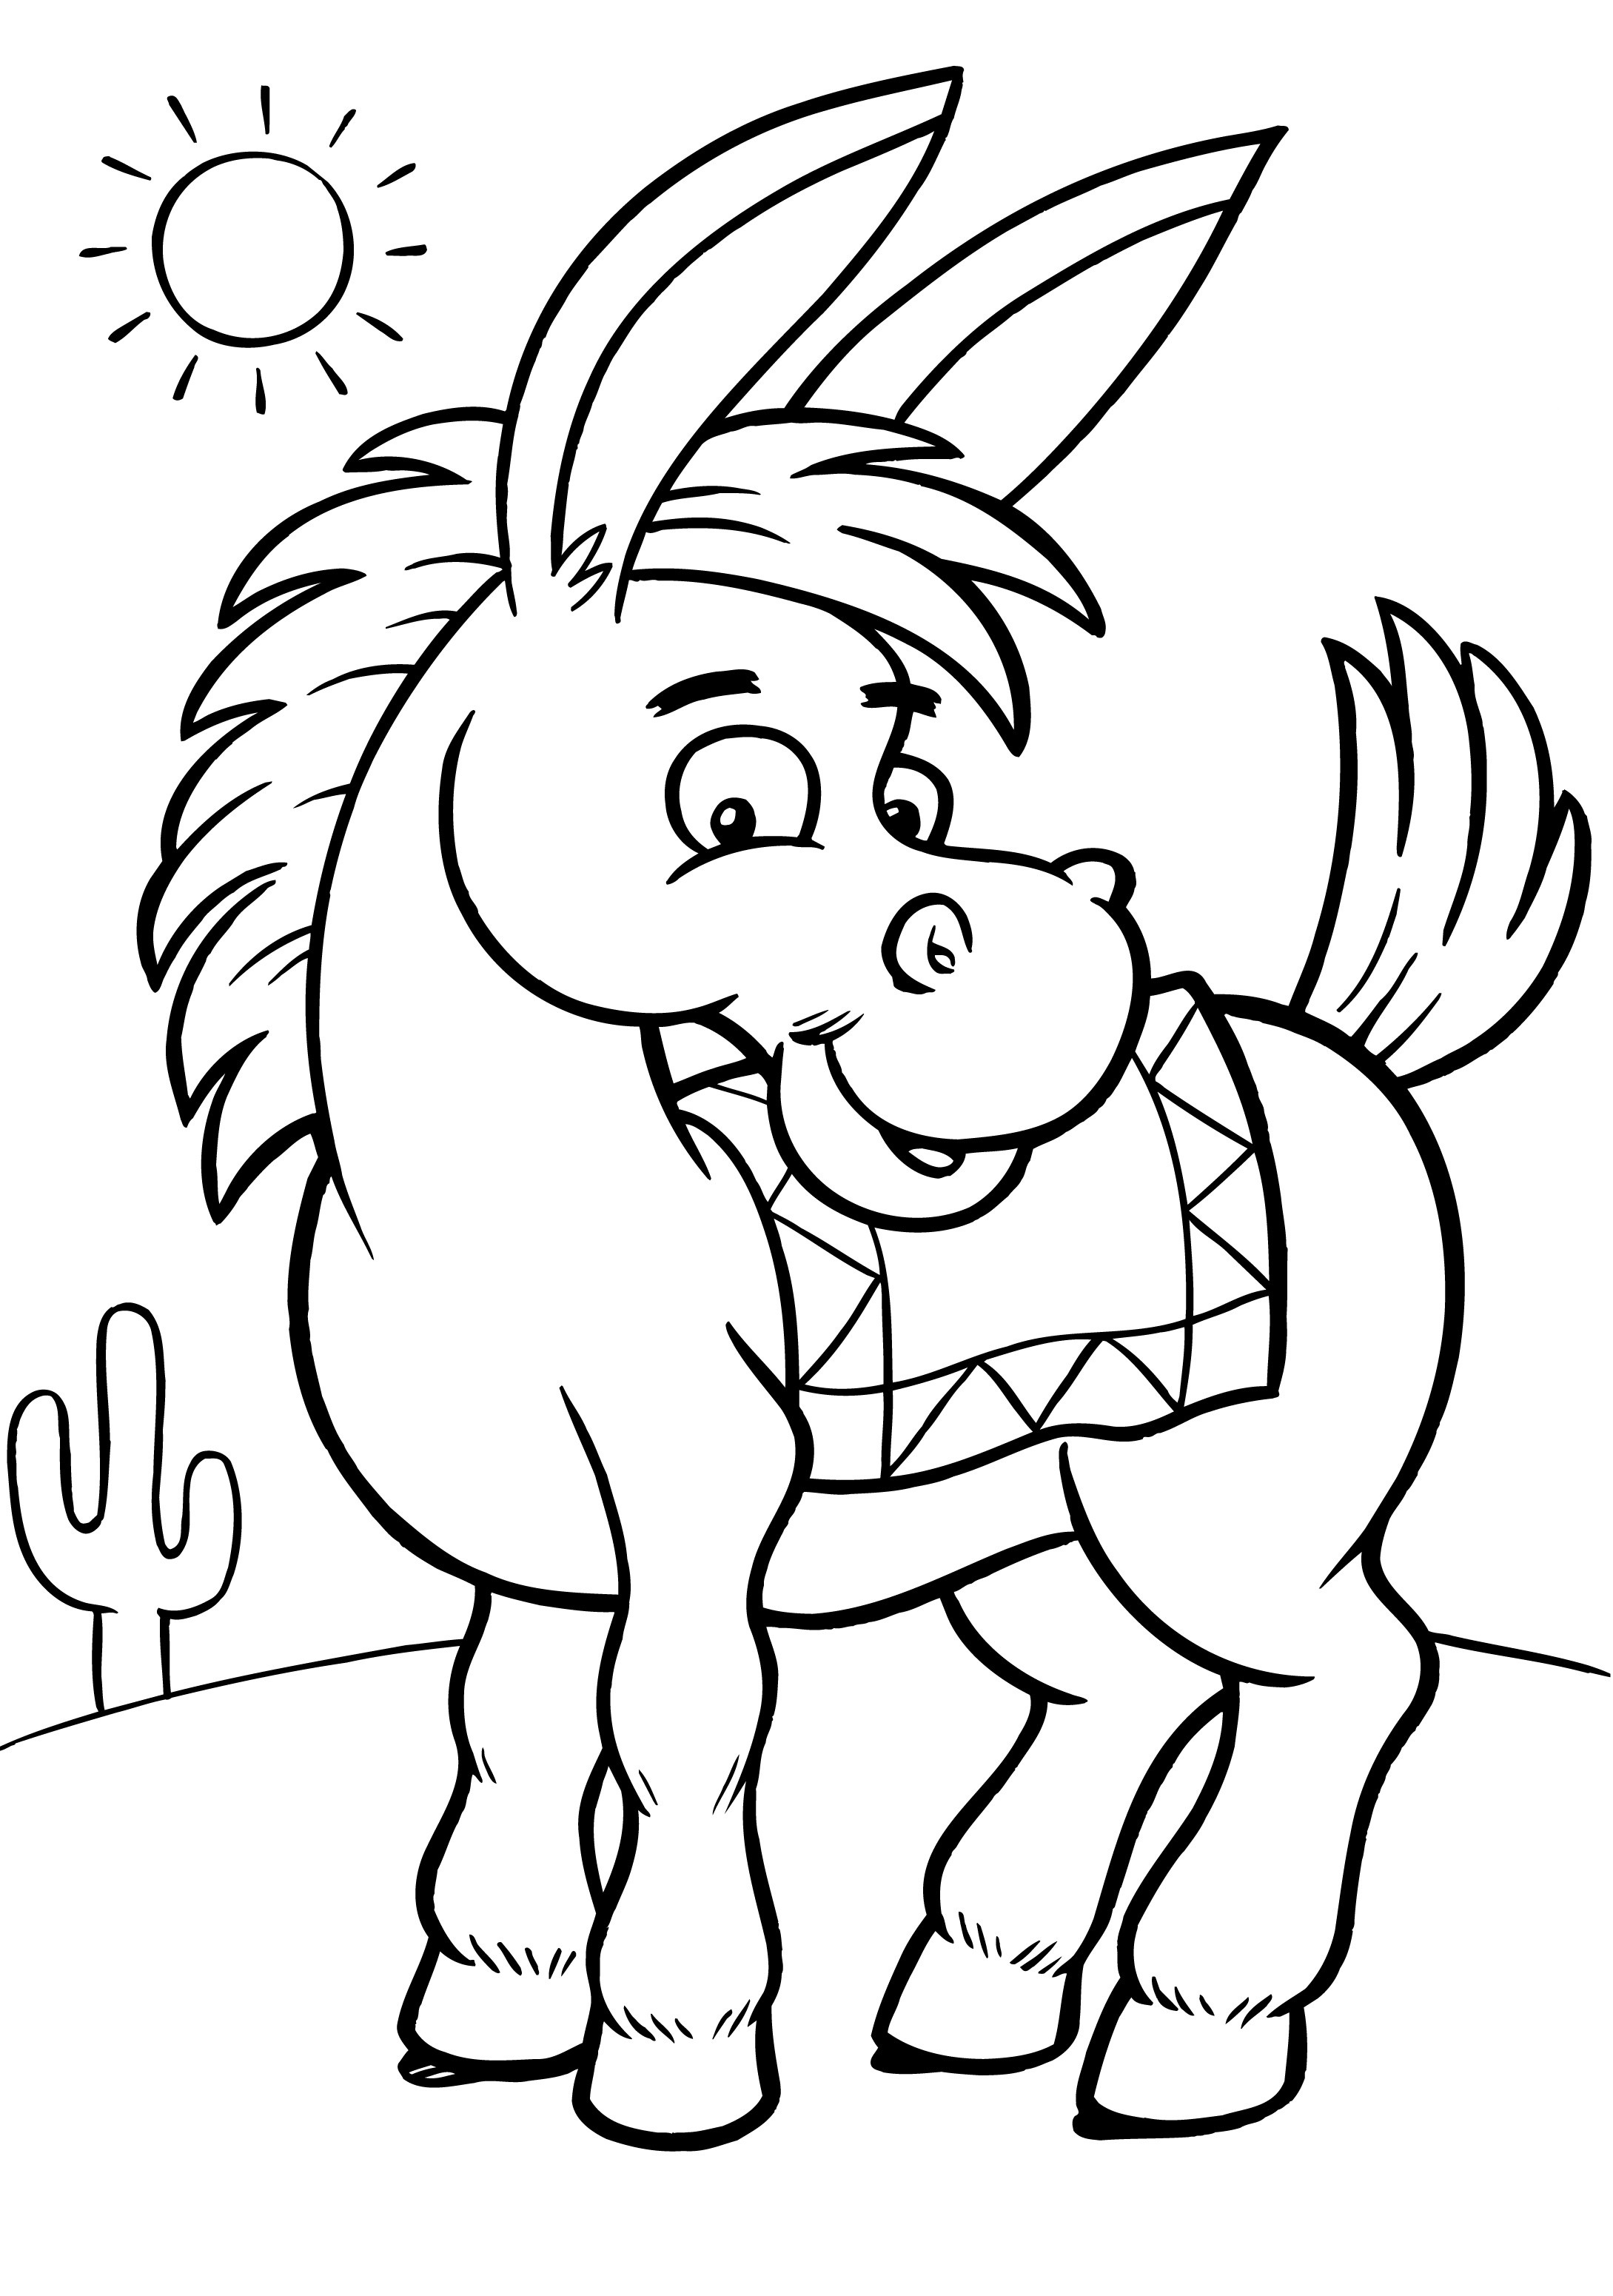 Donkey coloring page for kids Royalty Free Vector Image